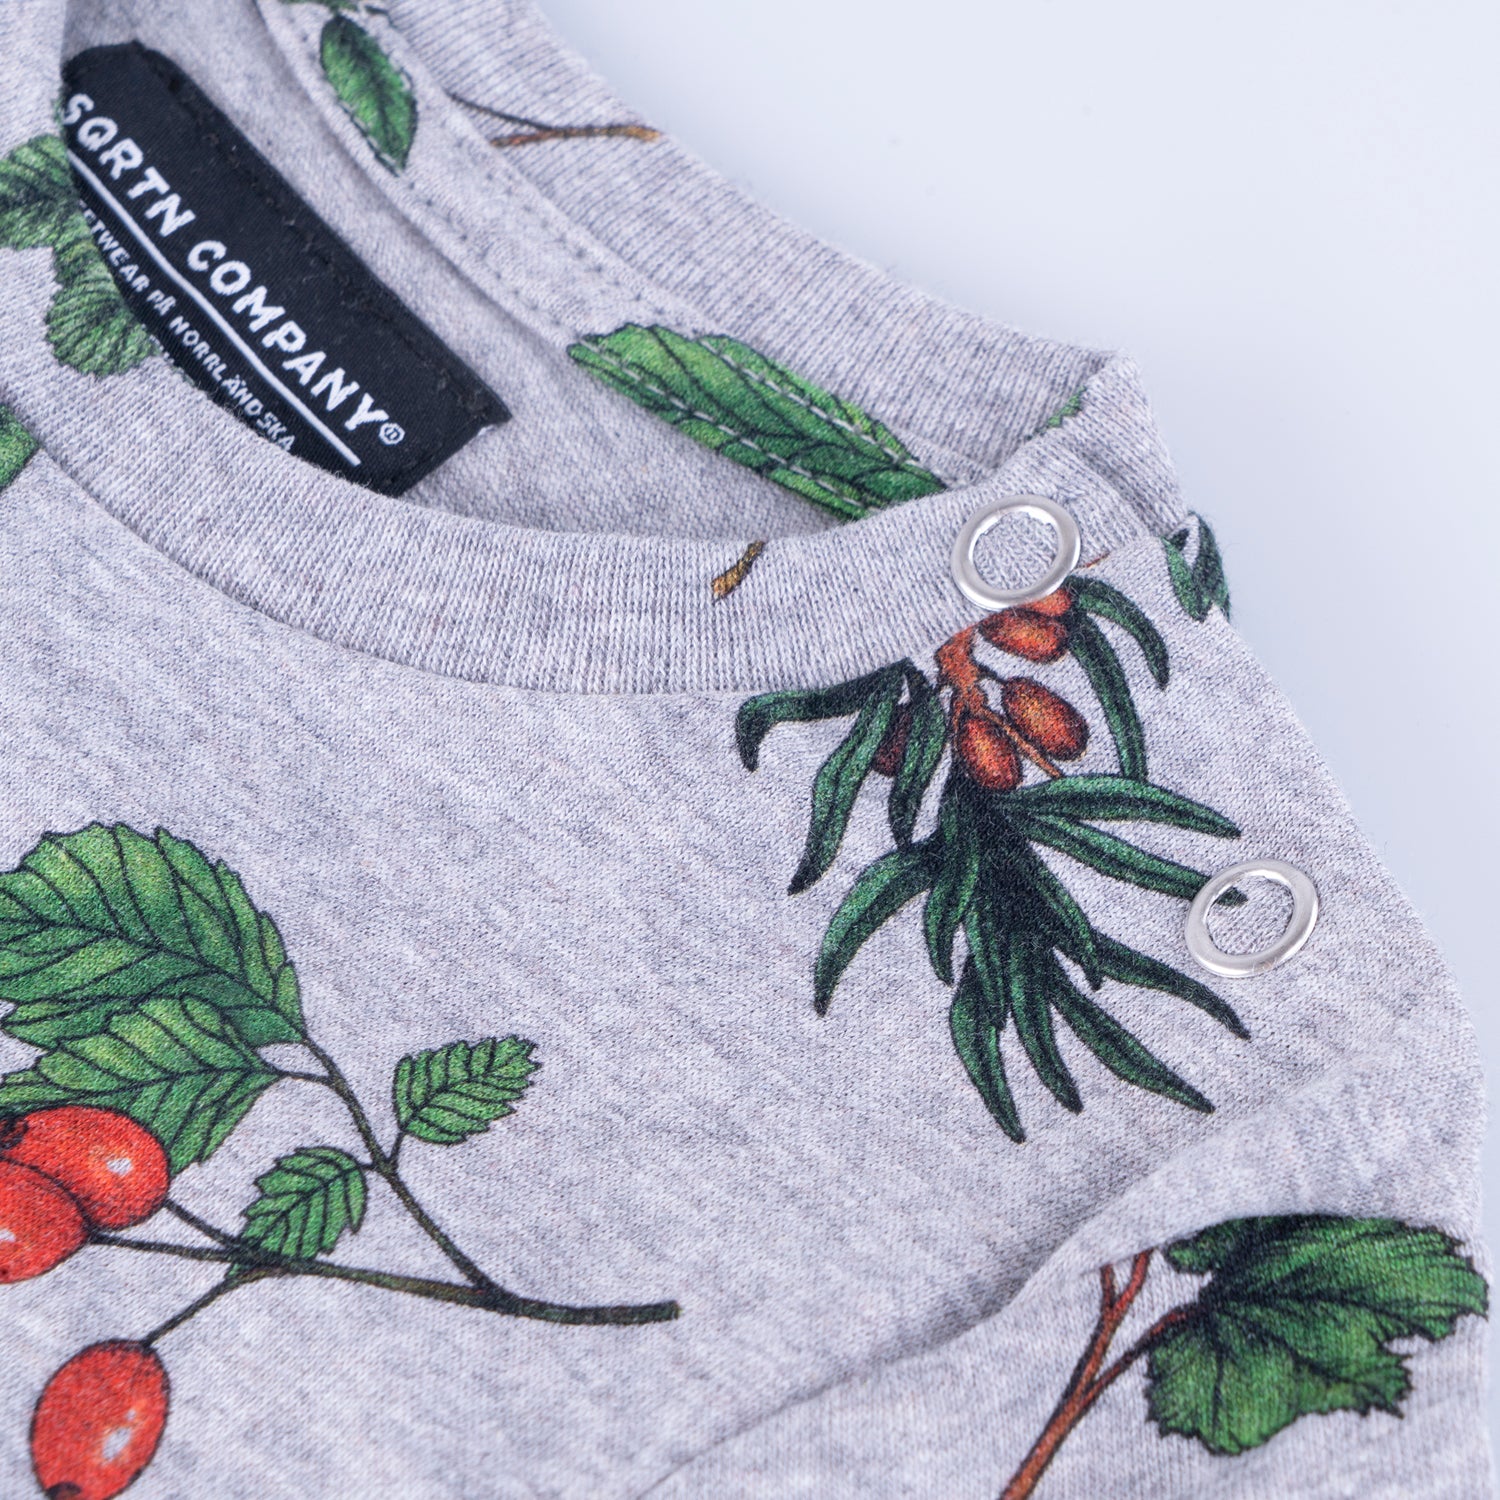 GREAT NORRLAND KIDS T-SHIRT - BERRY GREY